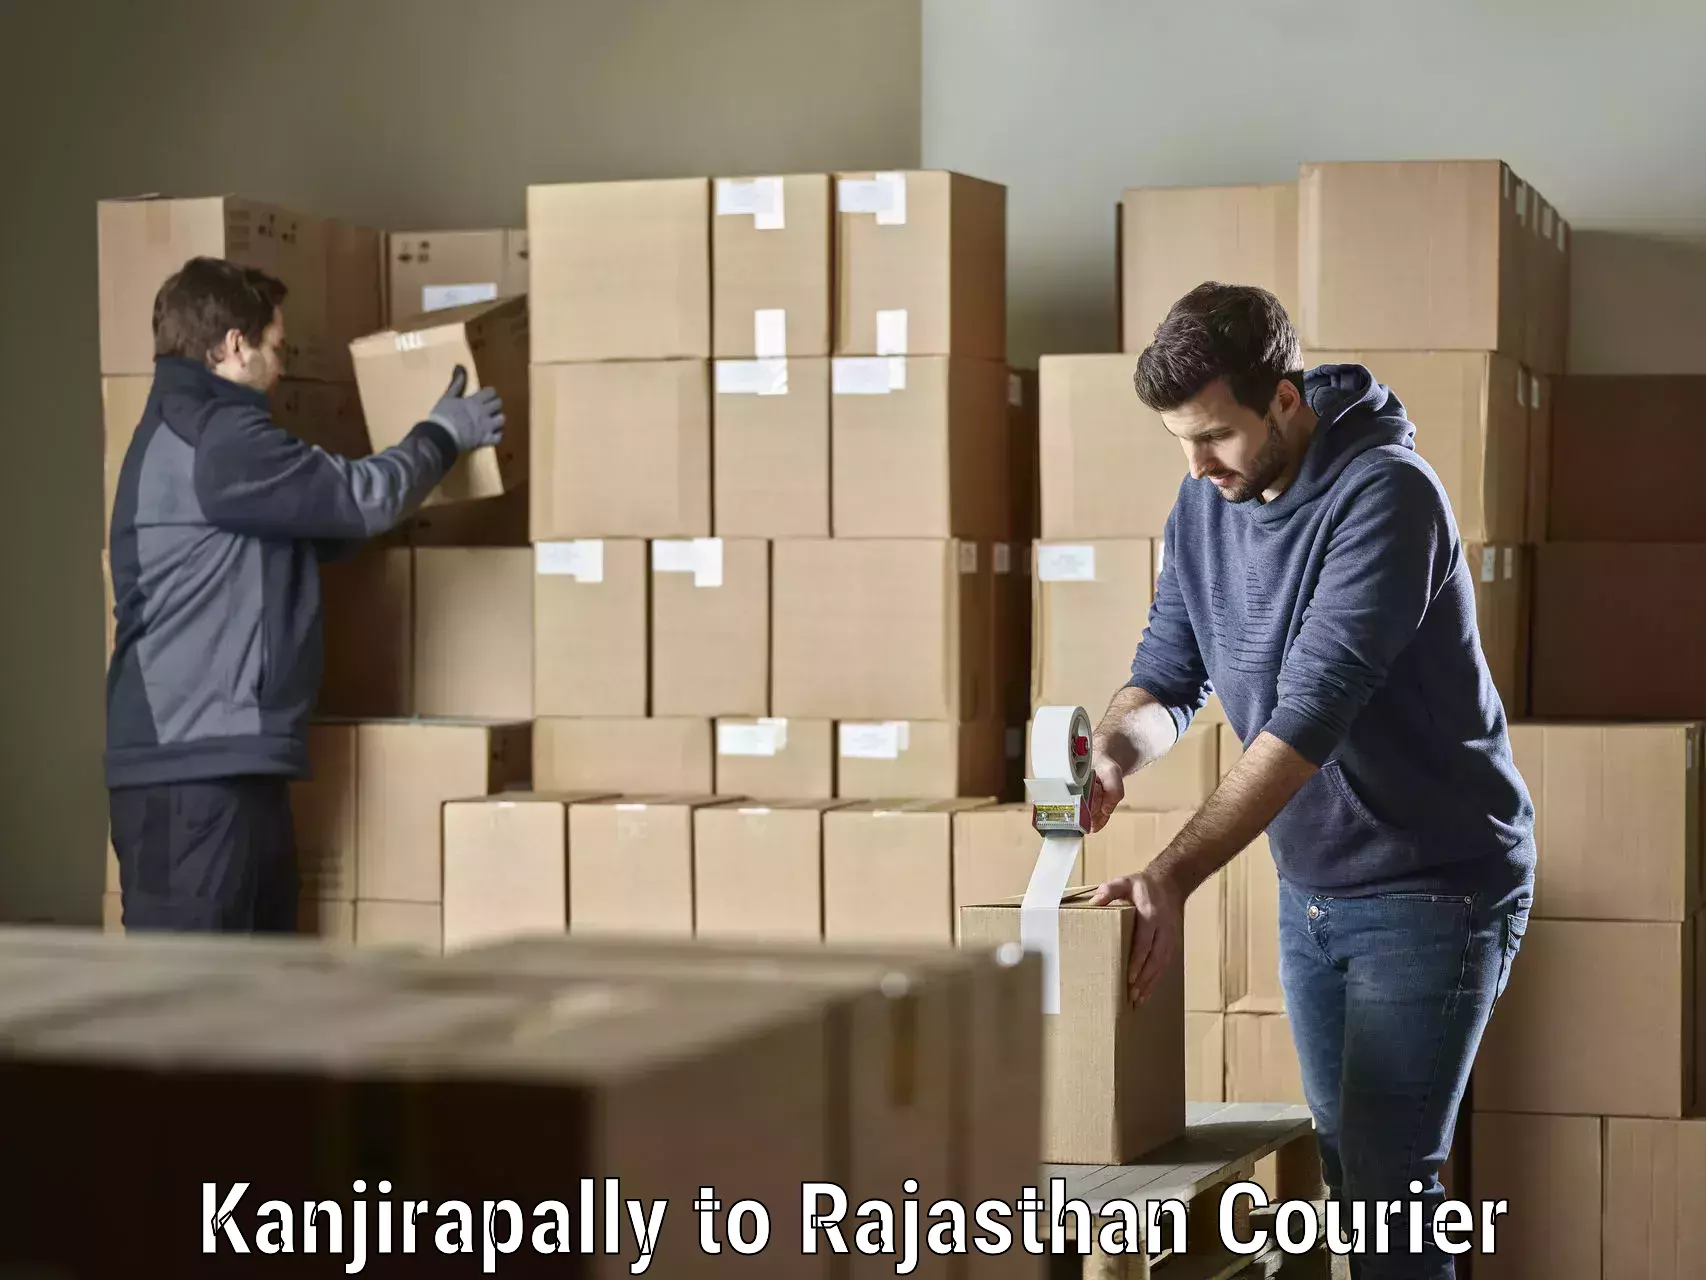 Courier service partnerships Kanjirapally to Rajasthan